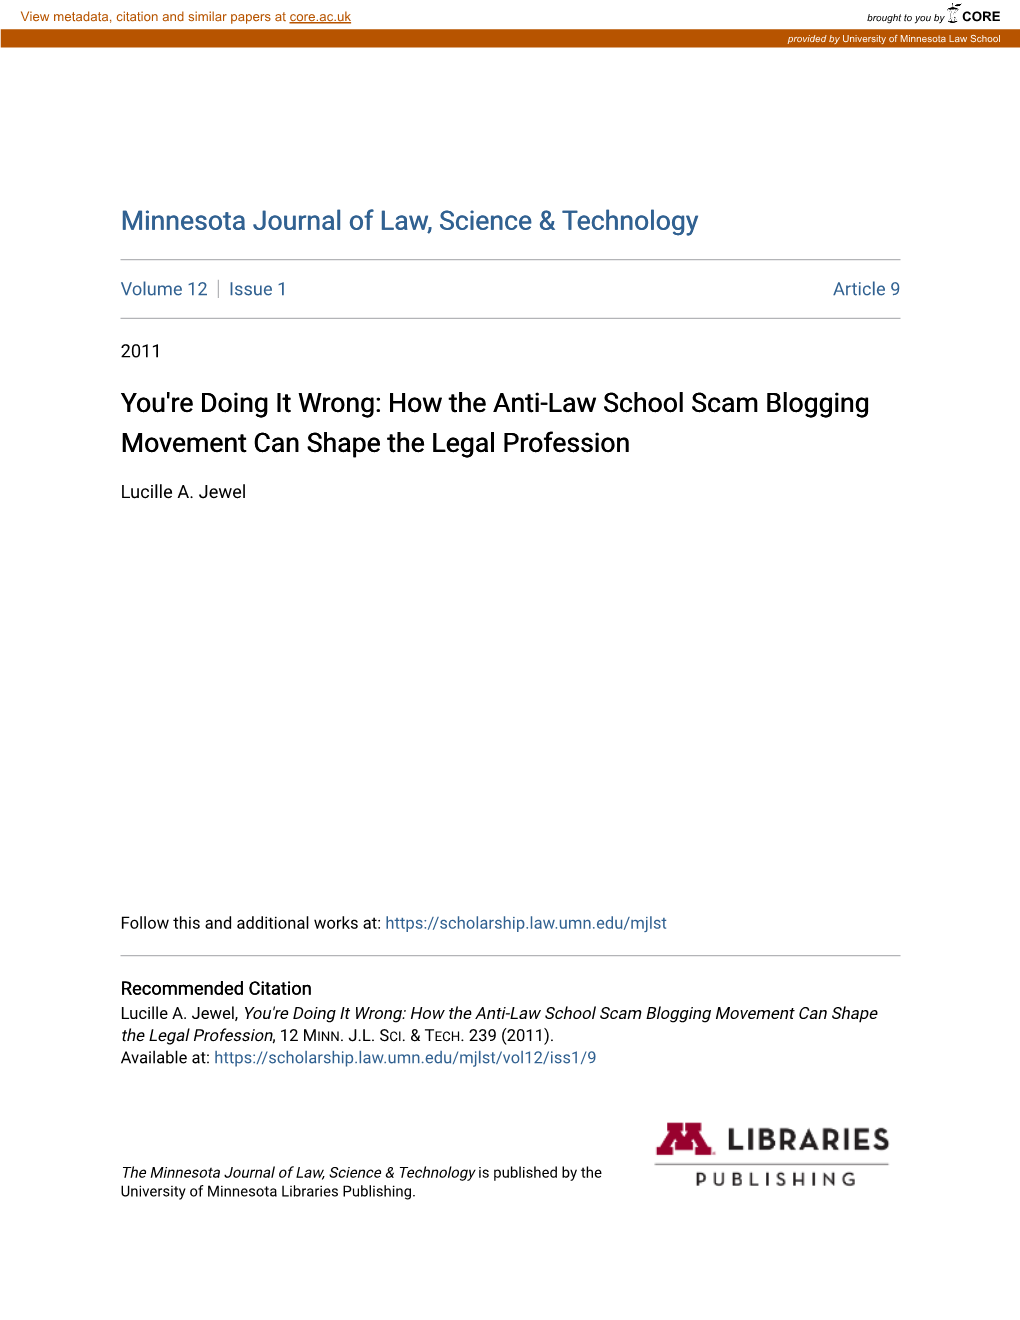 How the Anti-Law School Scam Blogging Movement Can Shape the Legal Profession